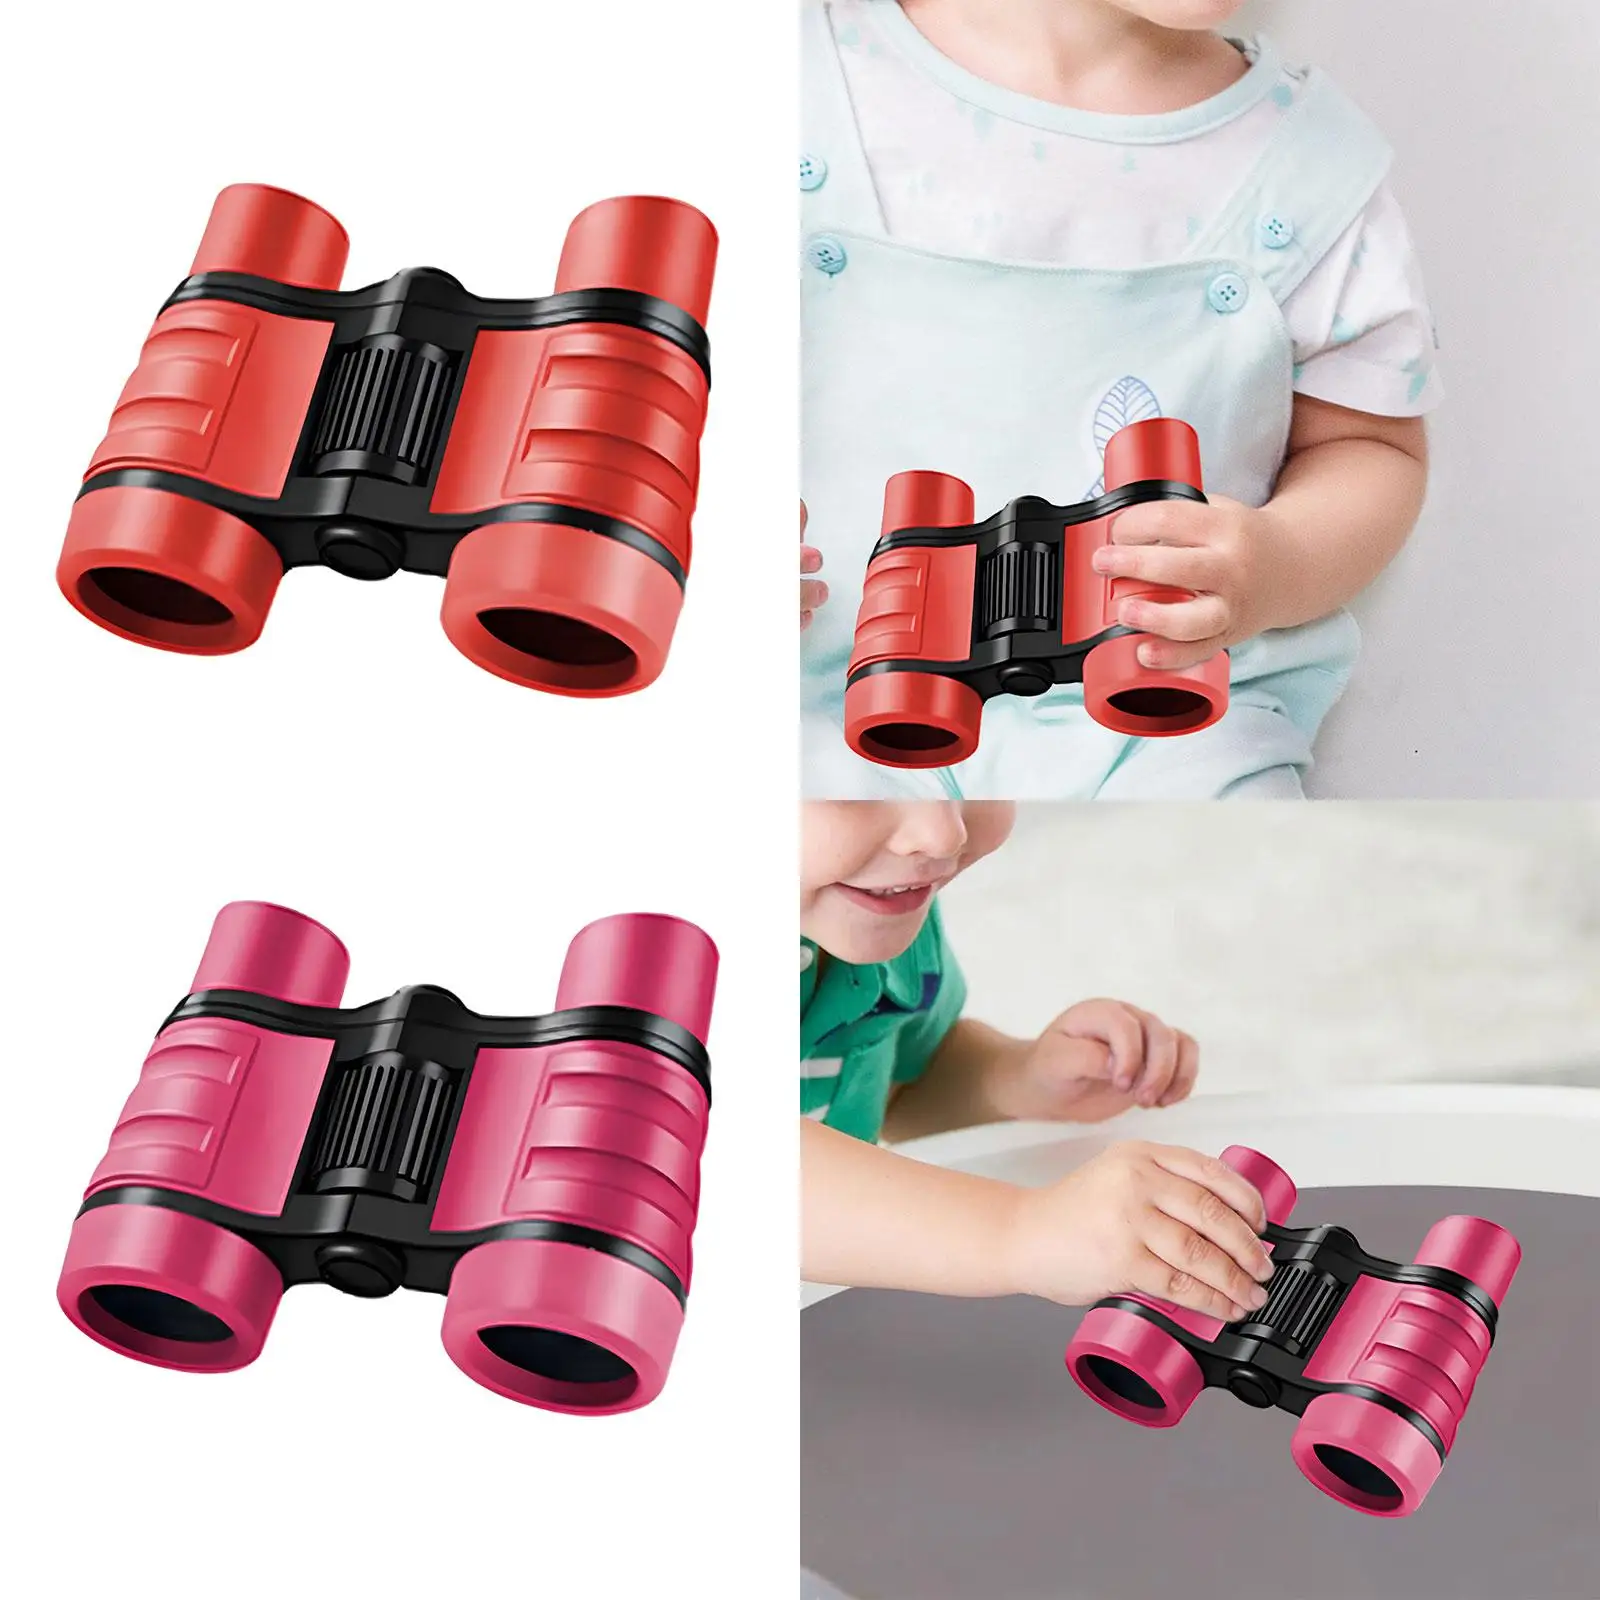 Kids Binoculars Toy 4x30 Learning Portable Children Magnification Toy for Outdoor Activity Hiking Present Ages 3-12 Years